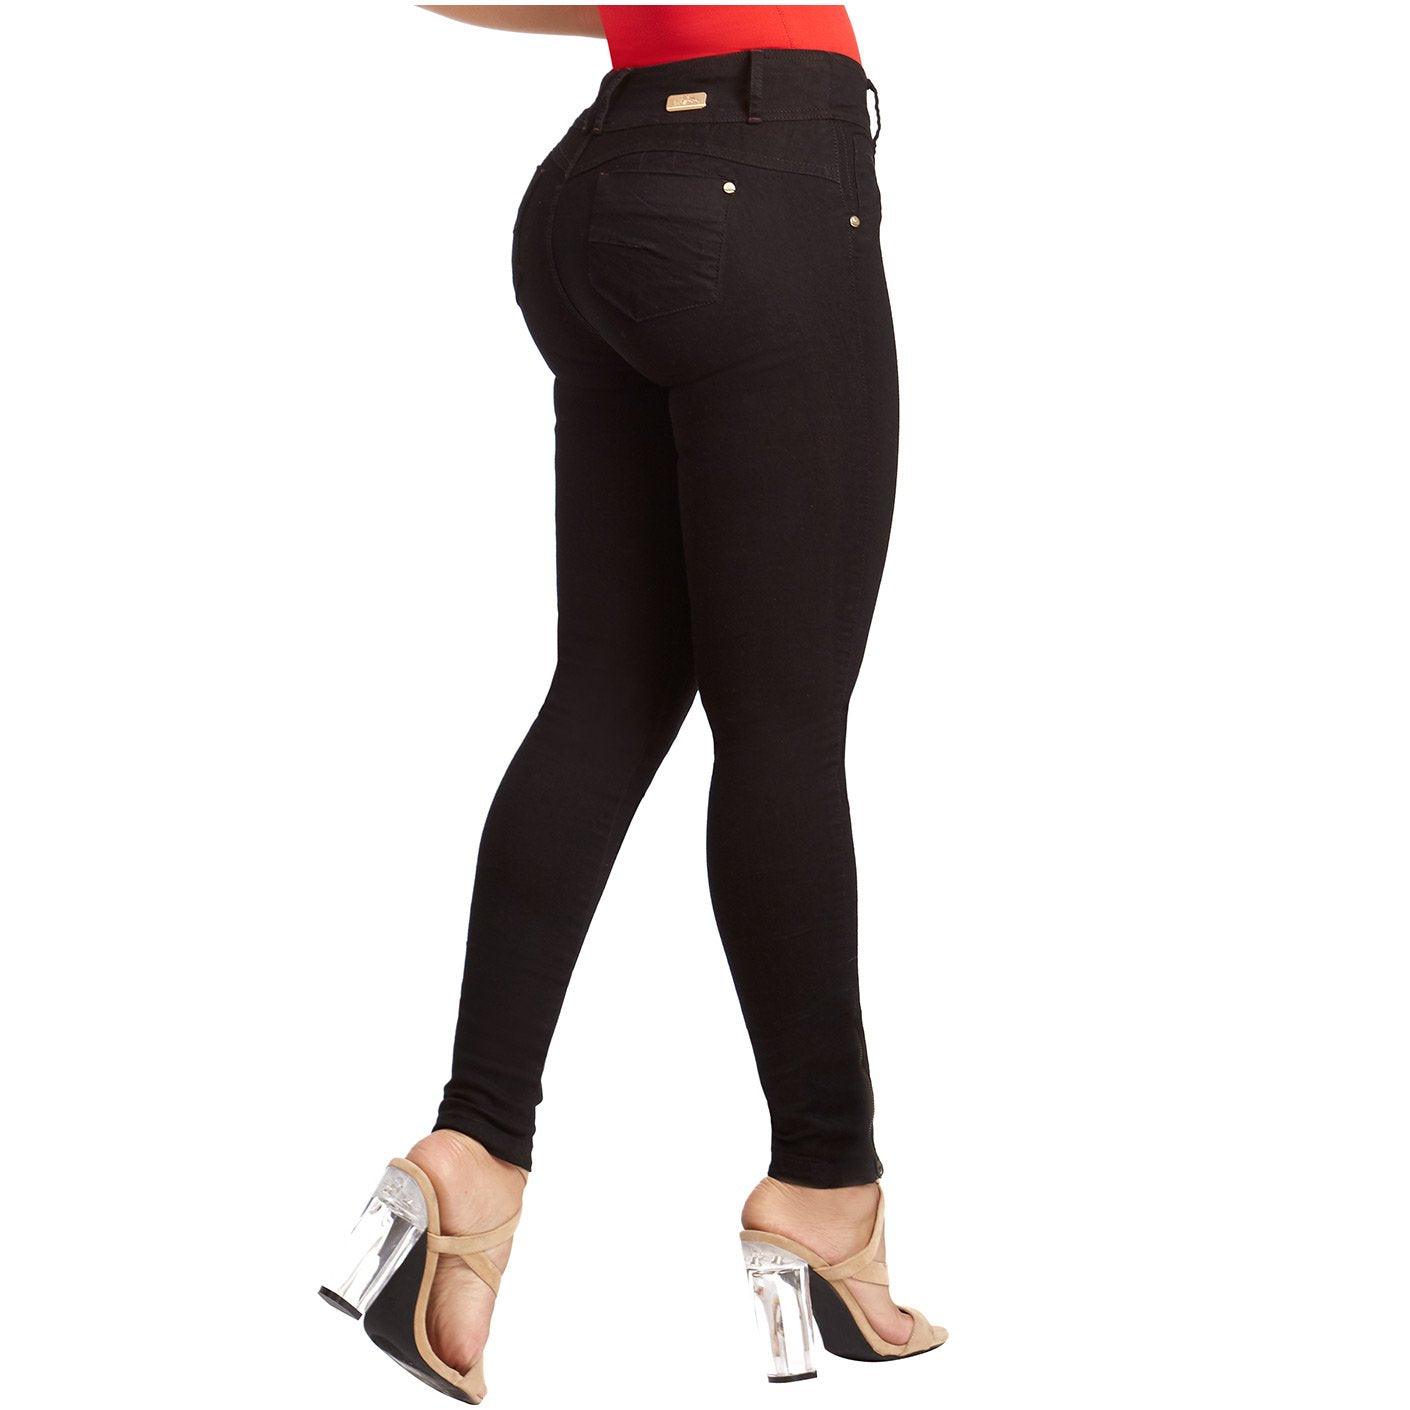 LT.ROSE Butt Lifting Colombian Jeans for Women | High Waisted Skinny Jeans